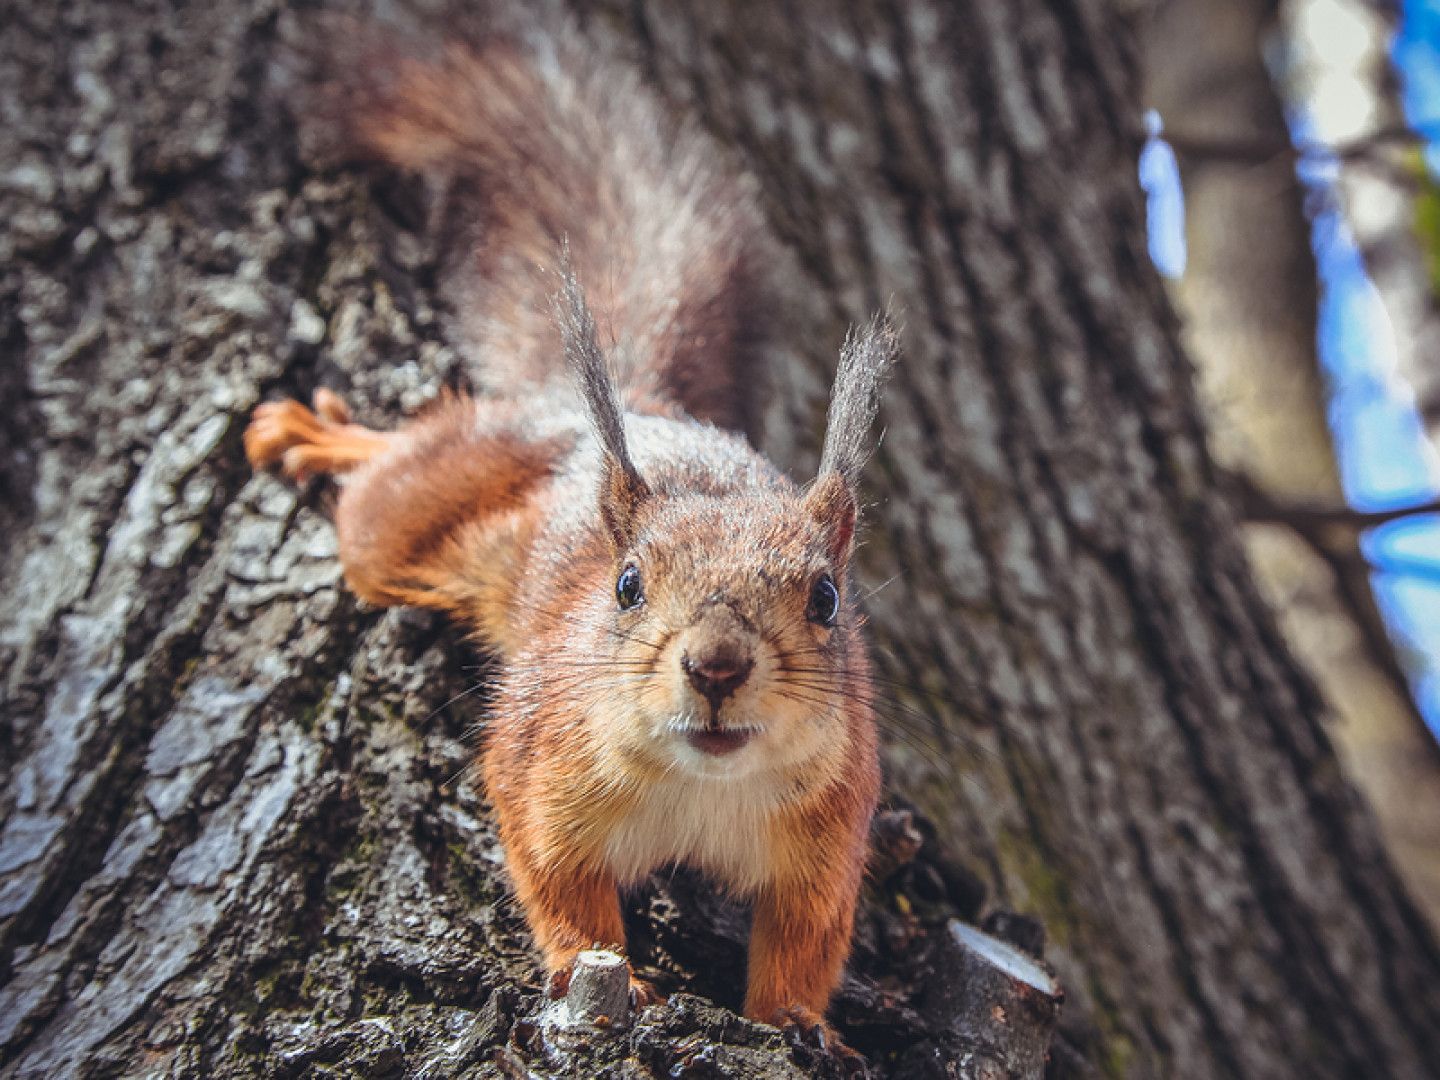 A squirrel is sitting on a tree trunk